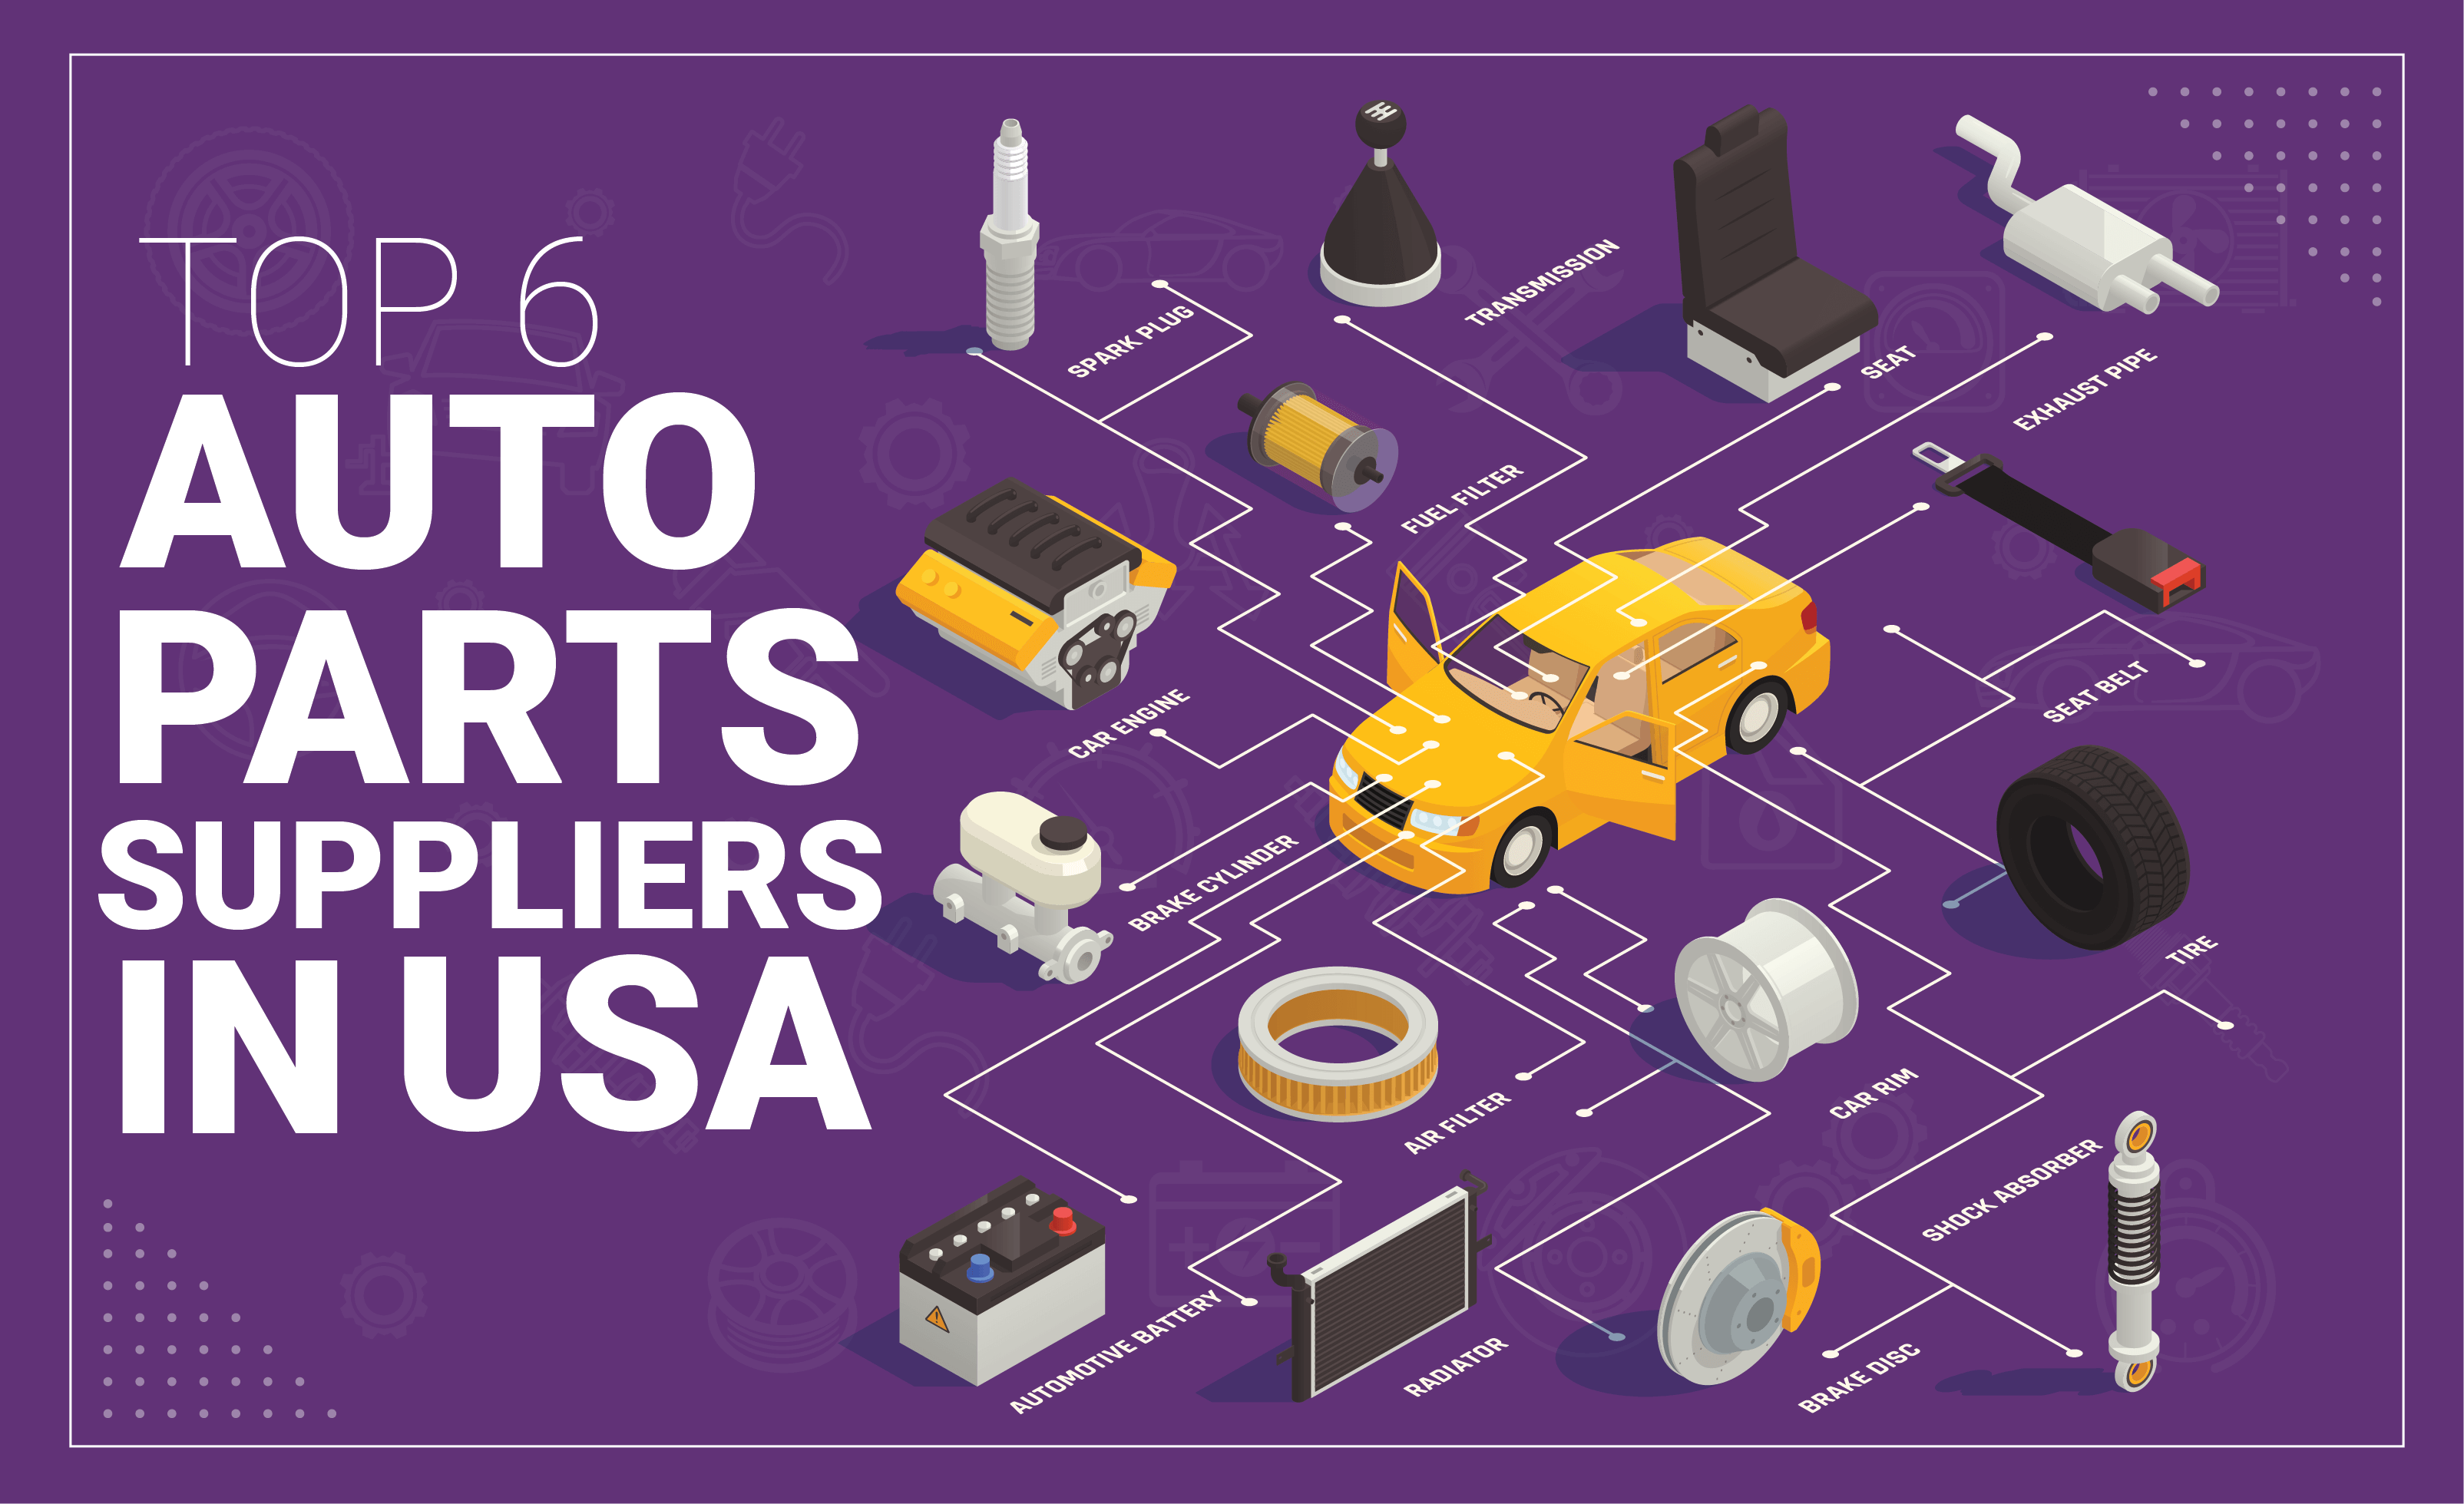 Top Auto Parts Suppliers in the USA